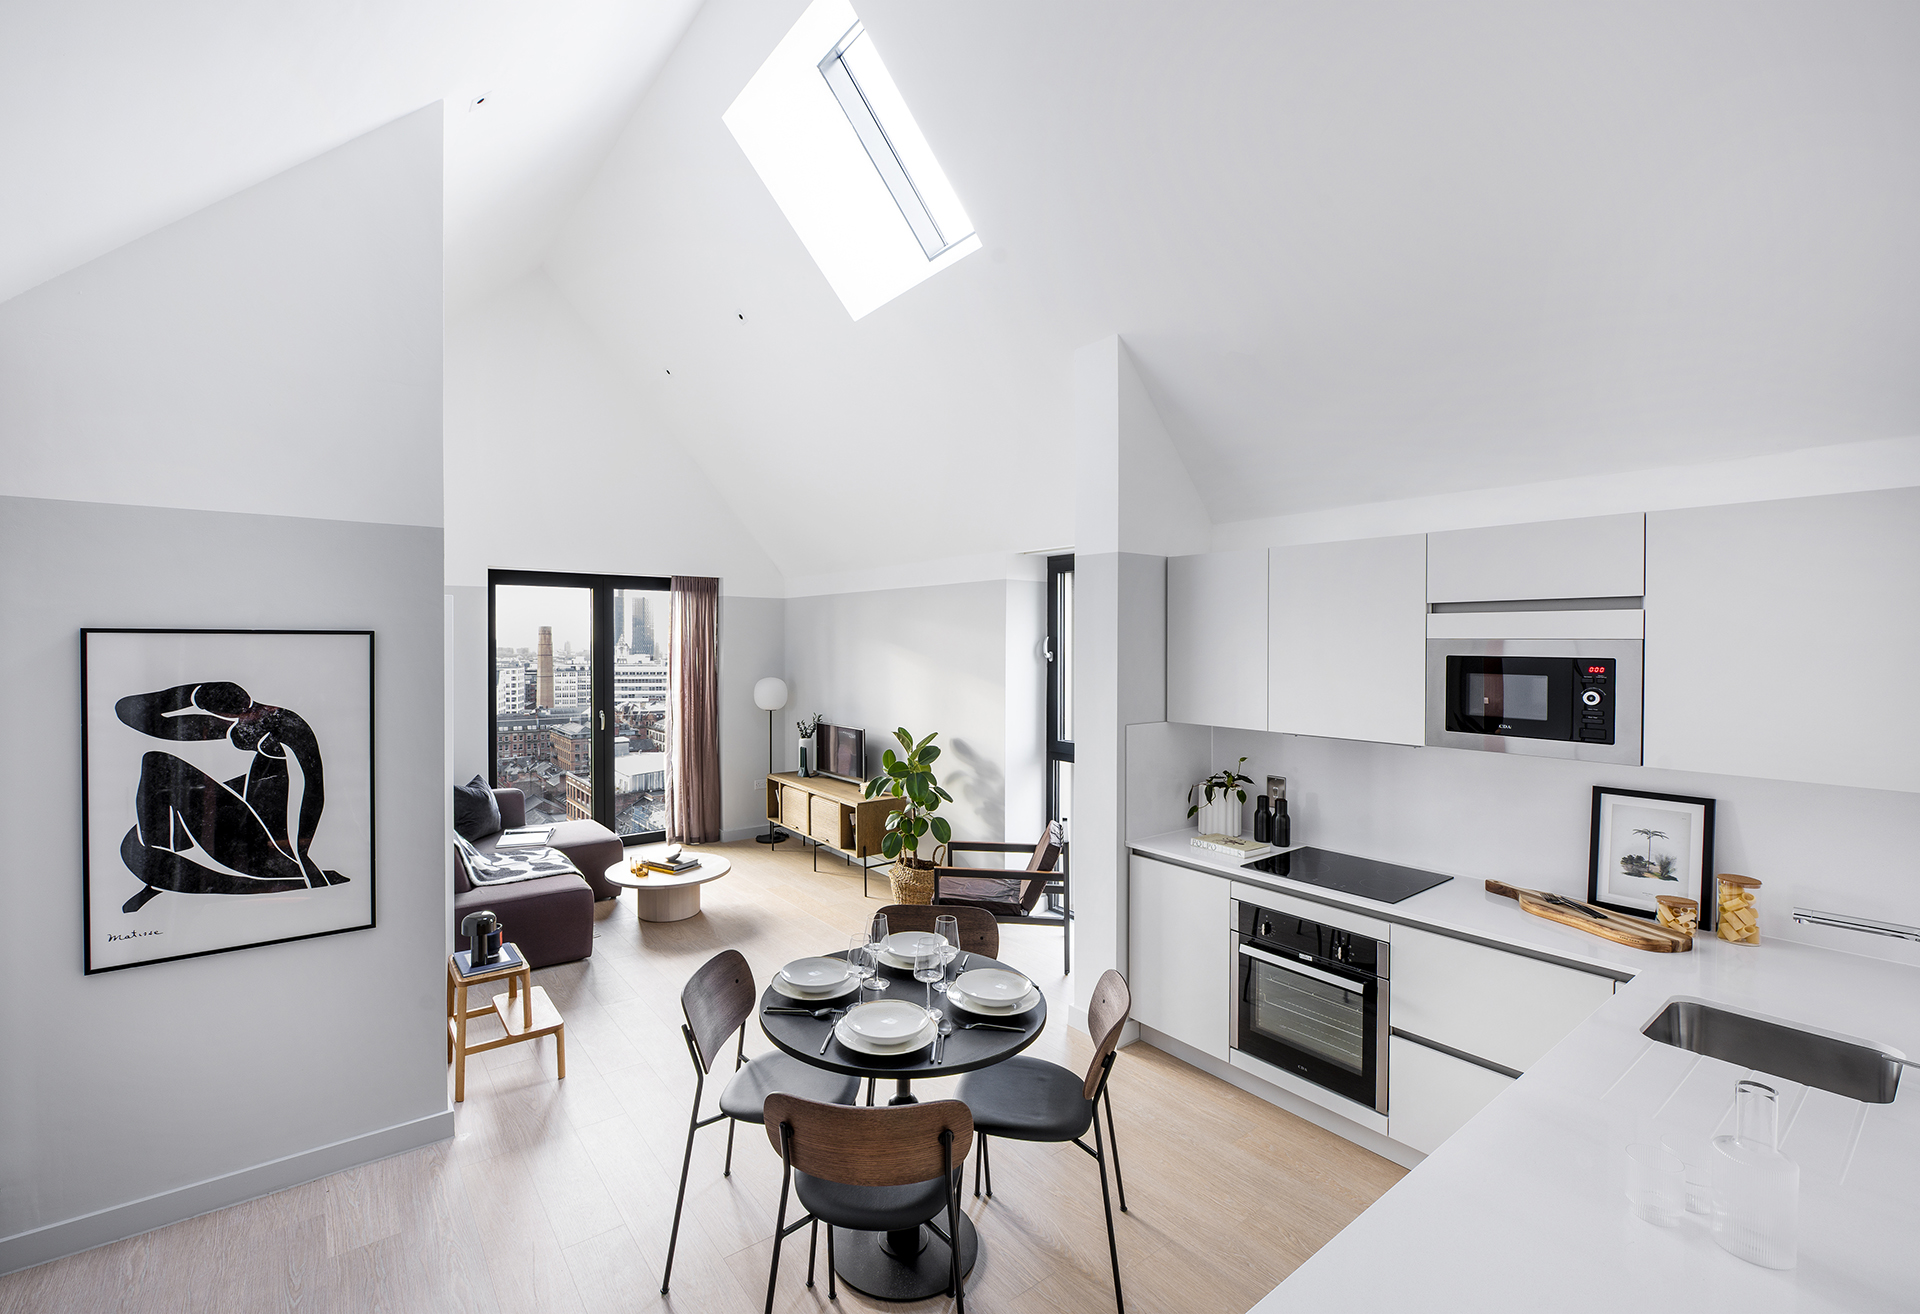 Kampus Apartment with Skylight and open plan space.